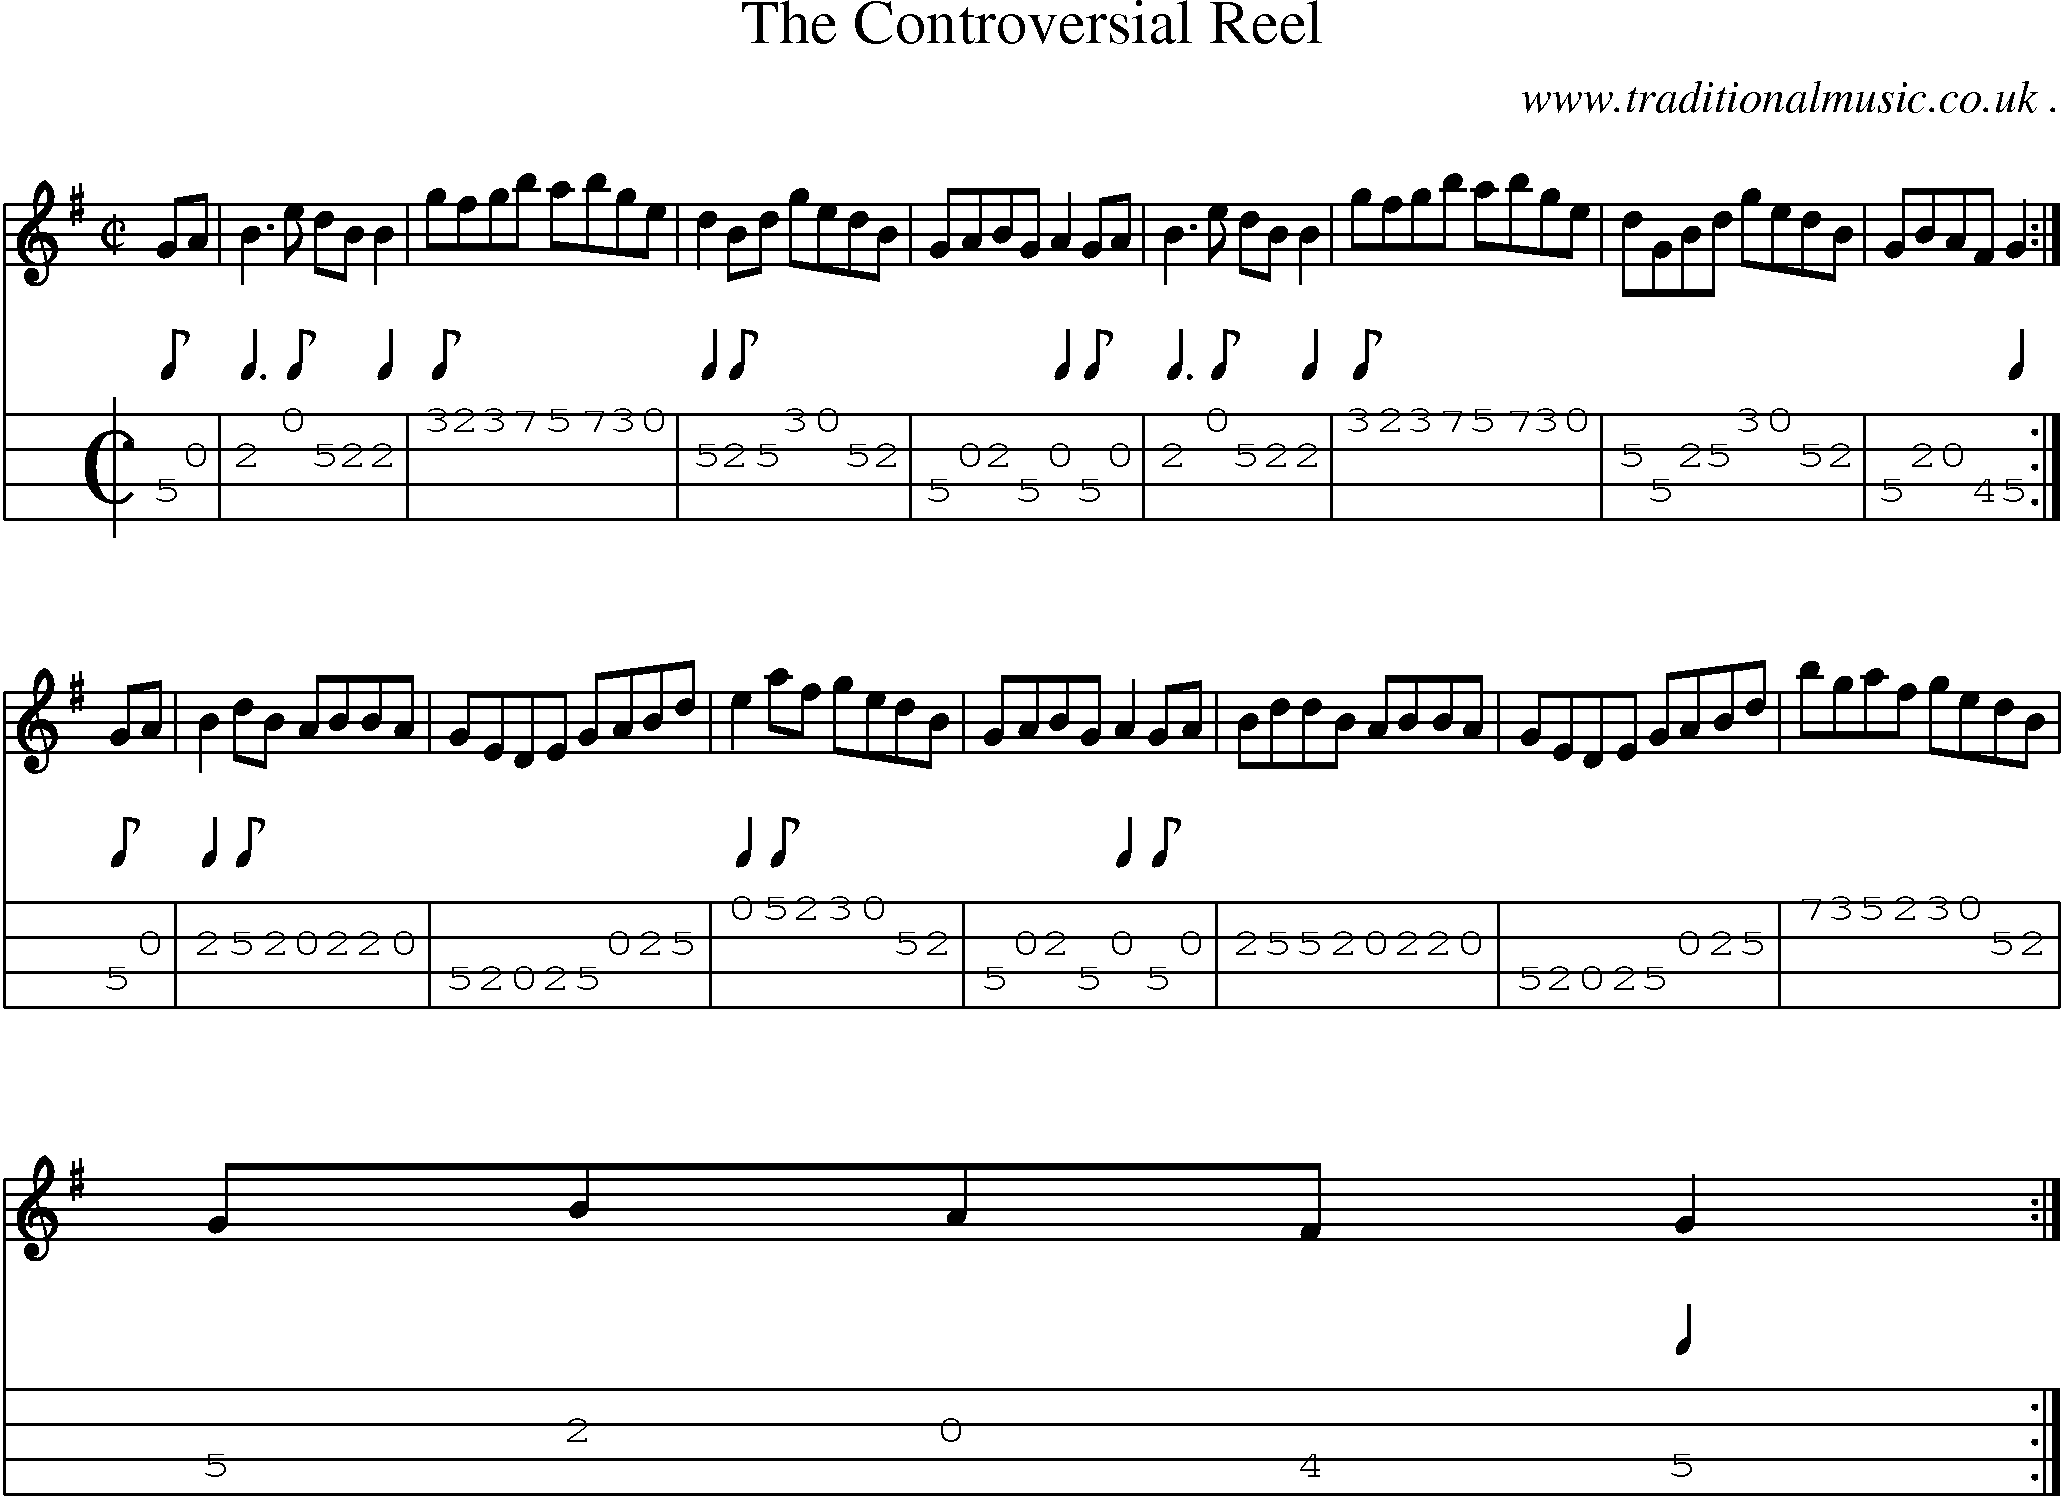 Sheet-Music and Mandolin Tabs for The Controversial Reel